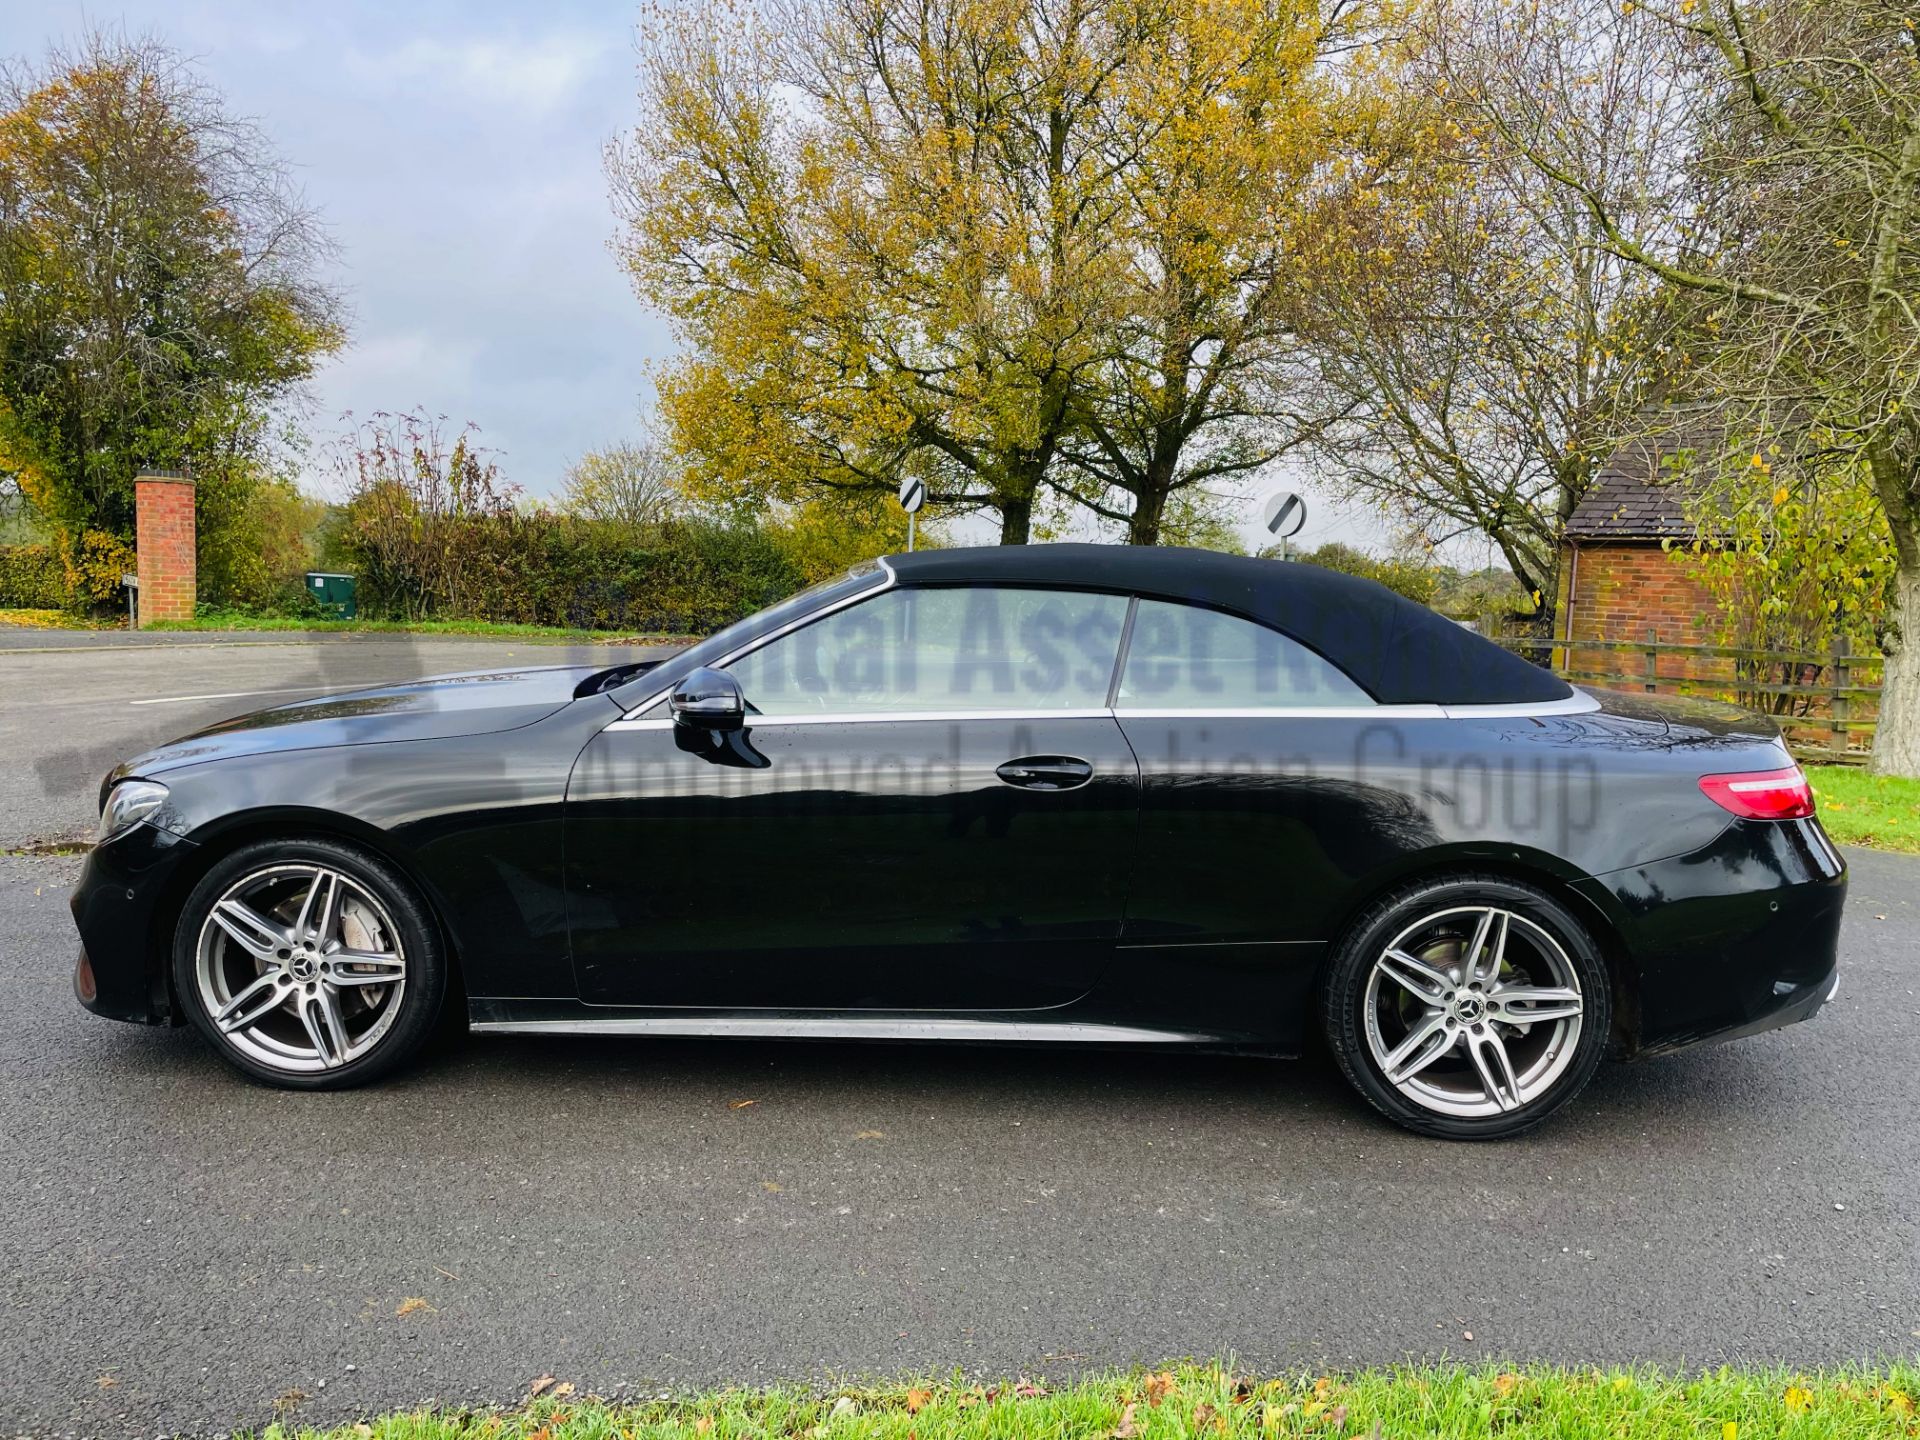 MERCEDES-BENZ E220D *AMG LINE - CABRIOLET* (2019 - EURO 6) '9G TRONIC AUTO - SAT NAV' *FULLY LOADED* - Image 16 of 66